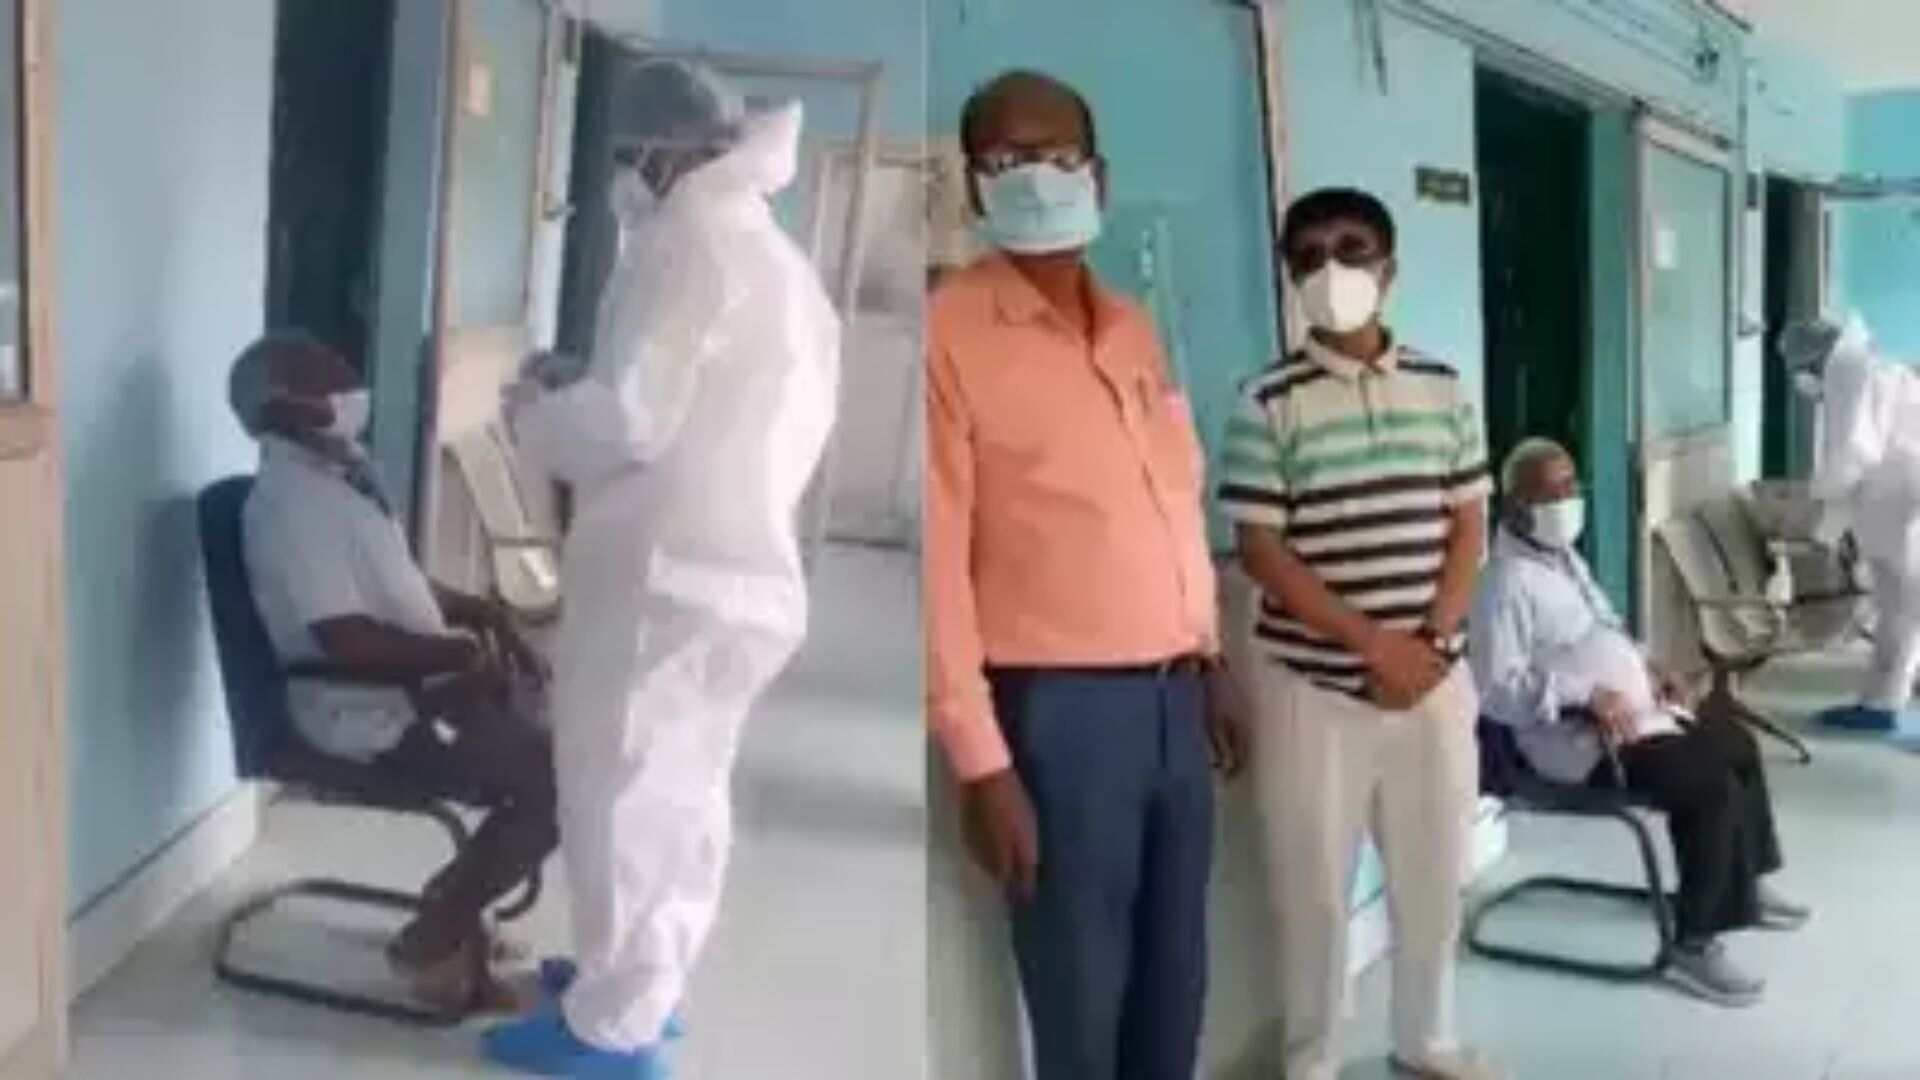 Bird Flu Outbreak: Two doctors, six others quarantined in Ranchi